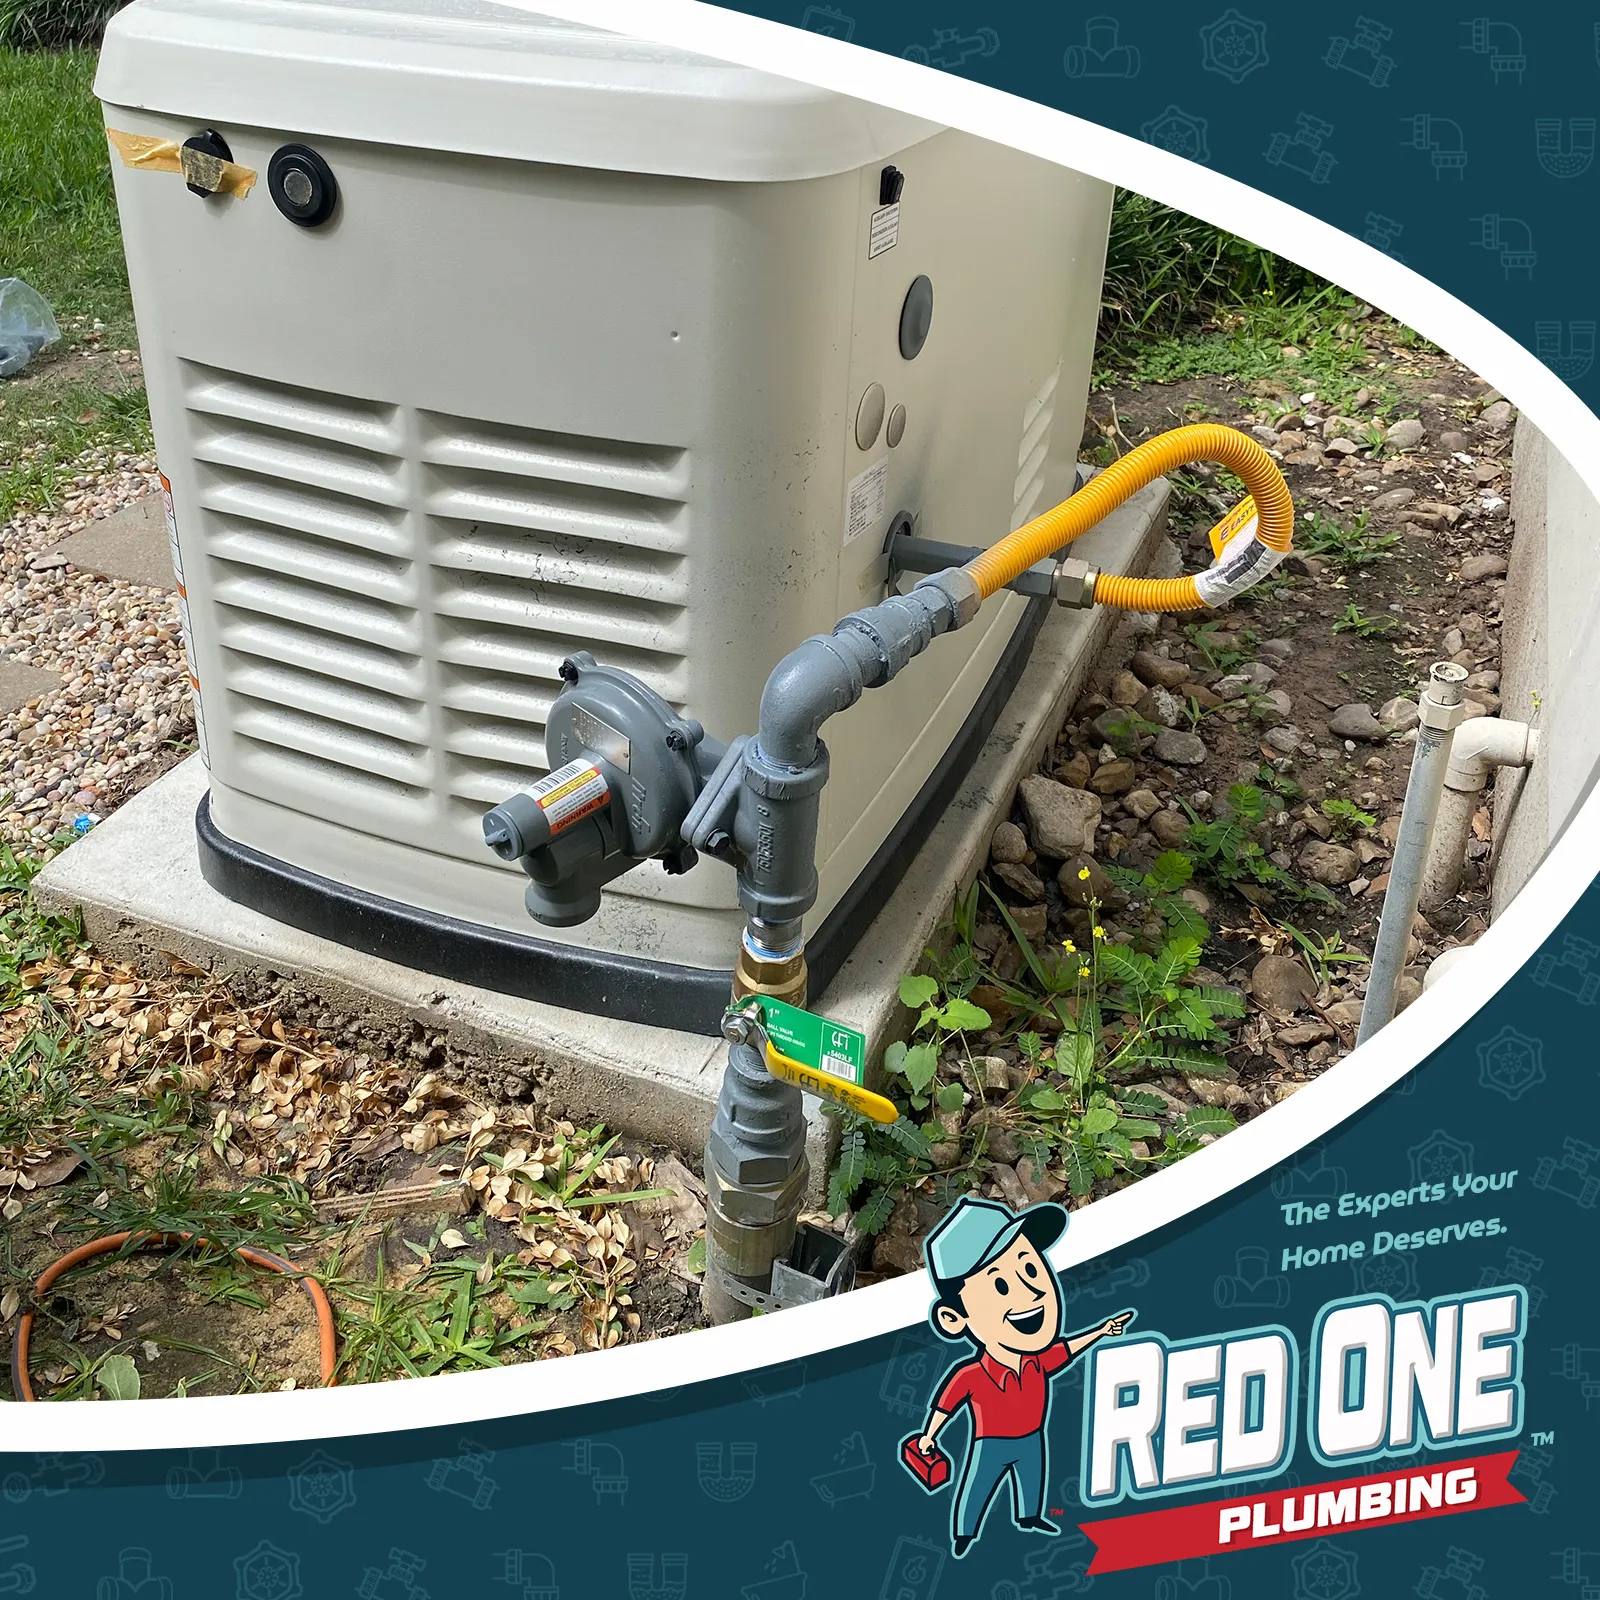 Generator and gas line installed by Red One Plumbing